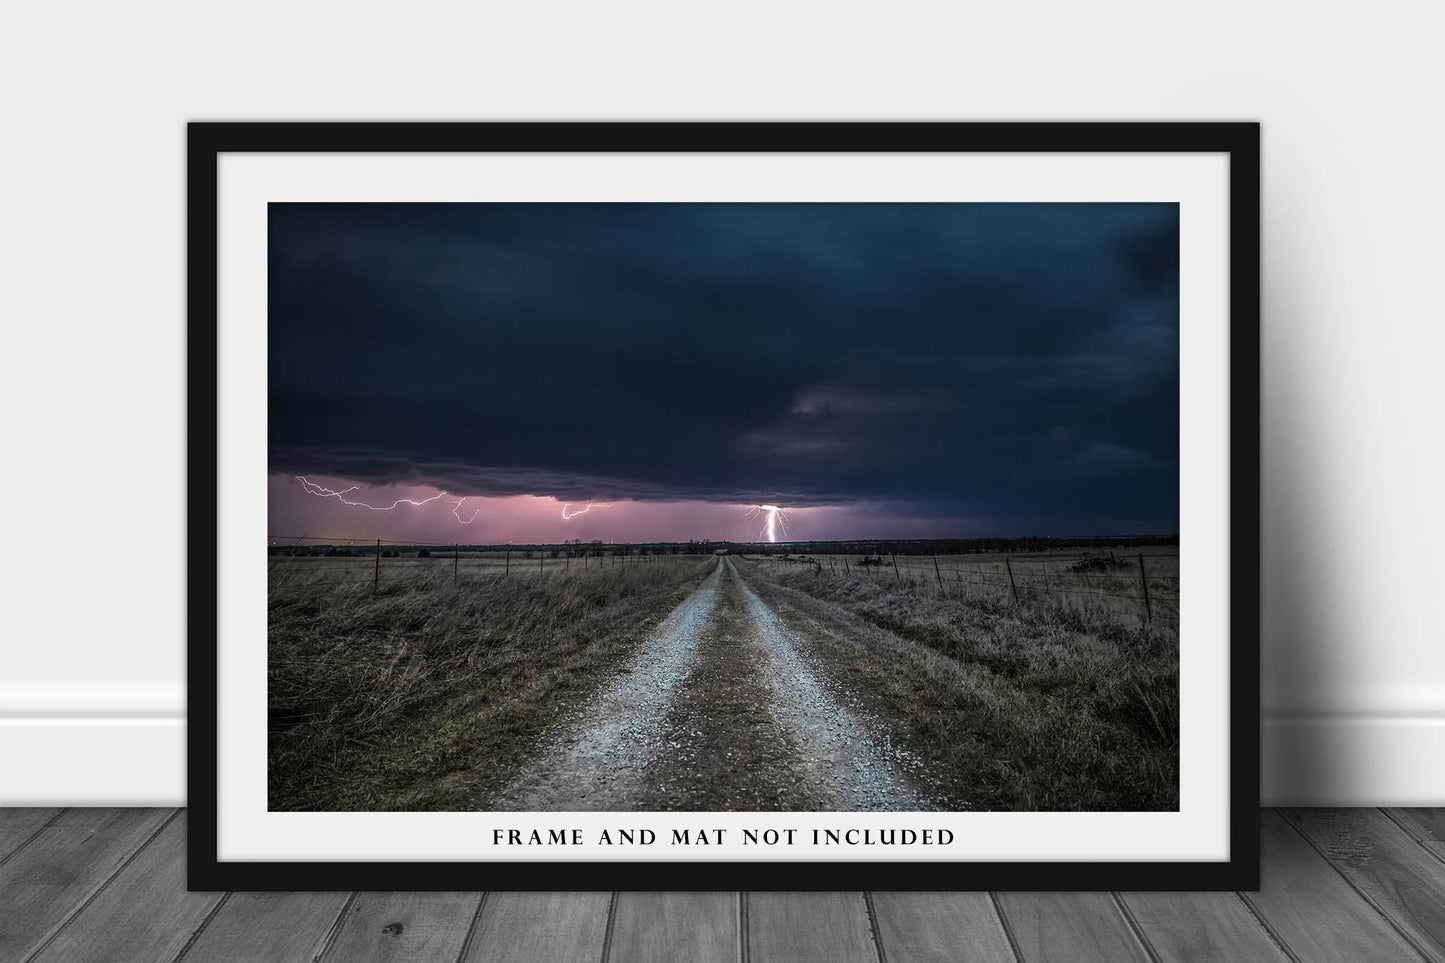 Storm Photography Print - Fine Art Photo of Country Road and Lightning Strike on Dark Stormy Night in Kansas Weather Wall Art Picture Decor